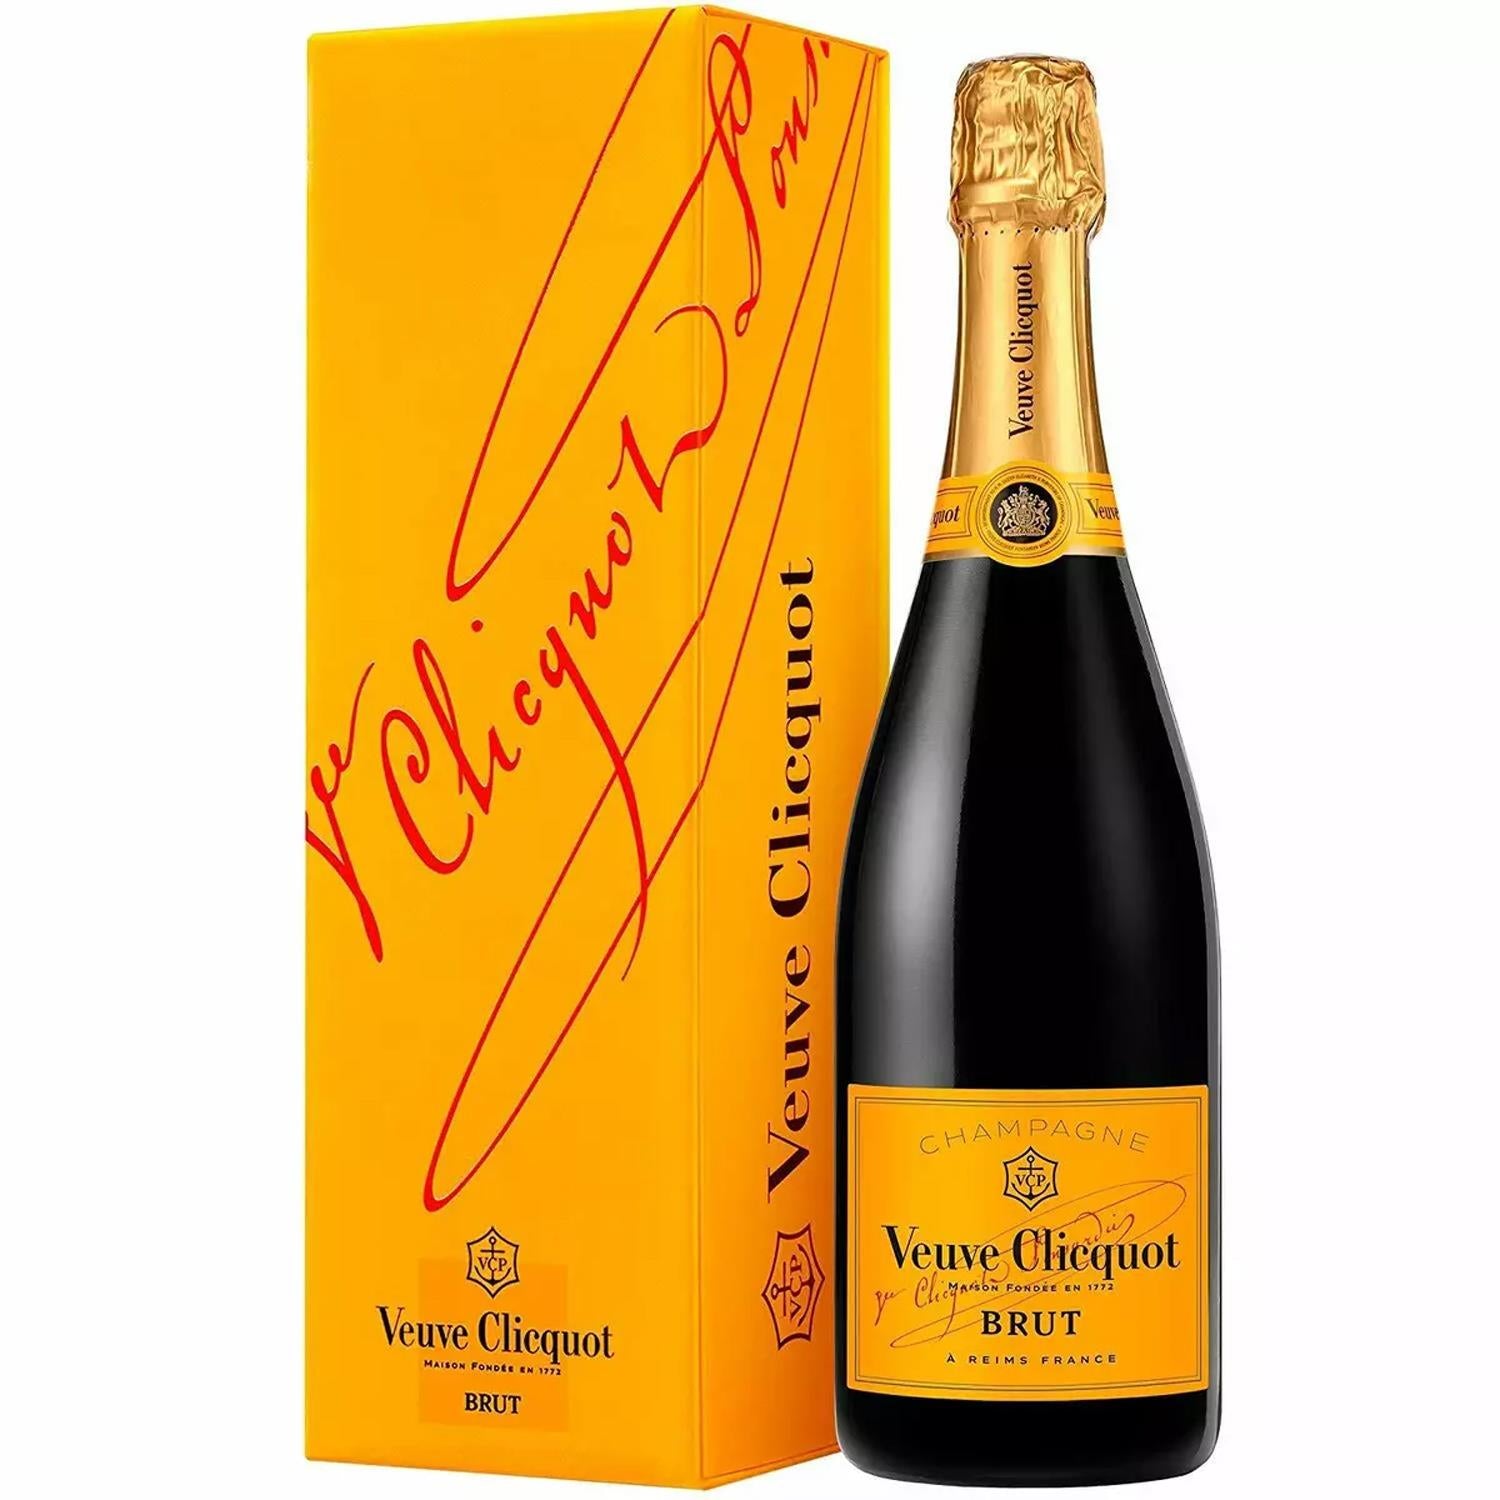 Veuve Clicquot Brut NV Champagne Yellow Label Gift Boxed 75cl